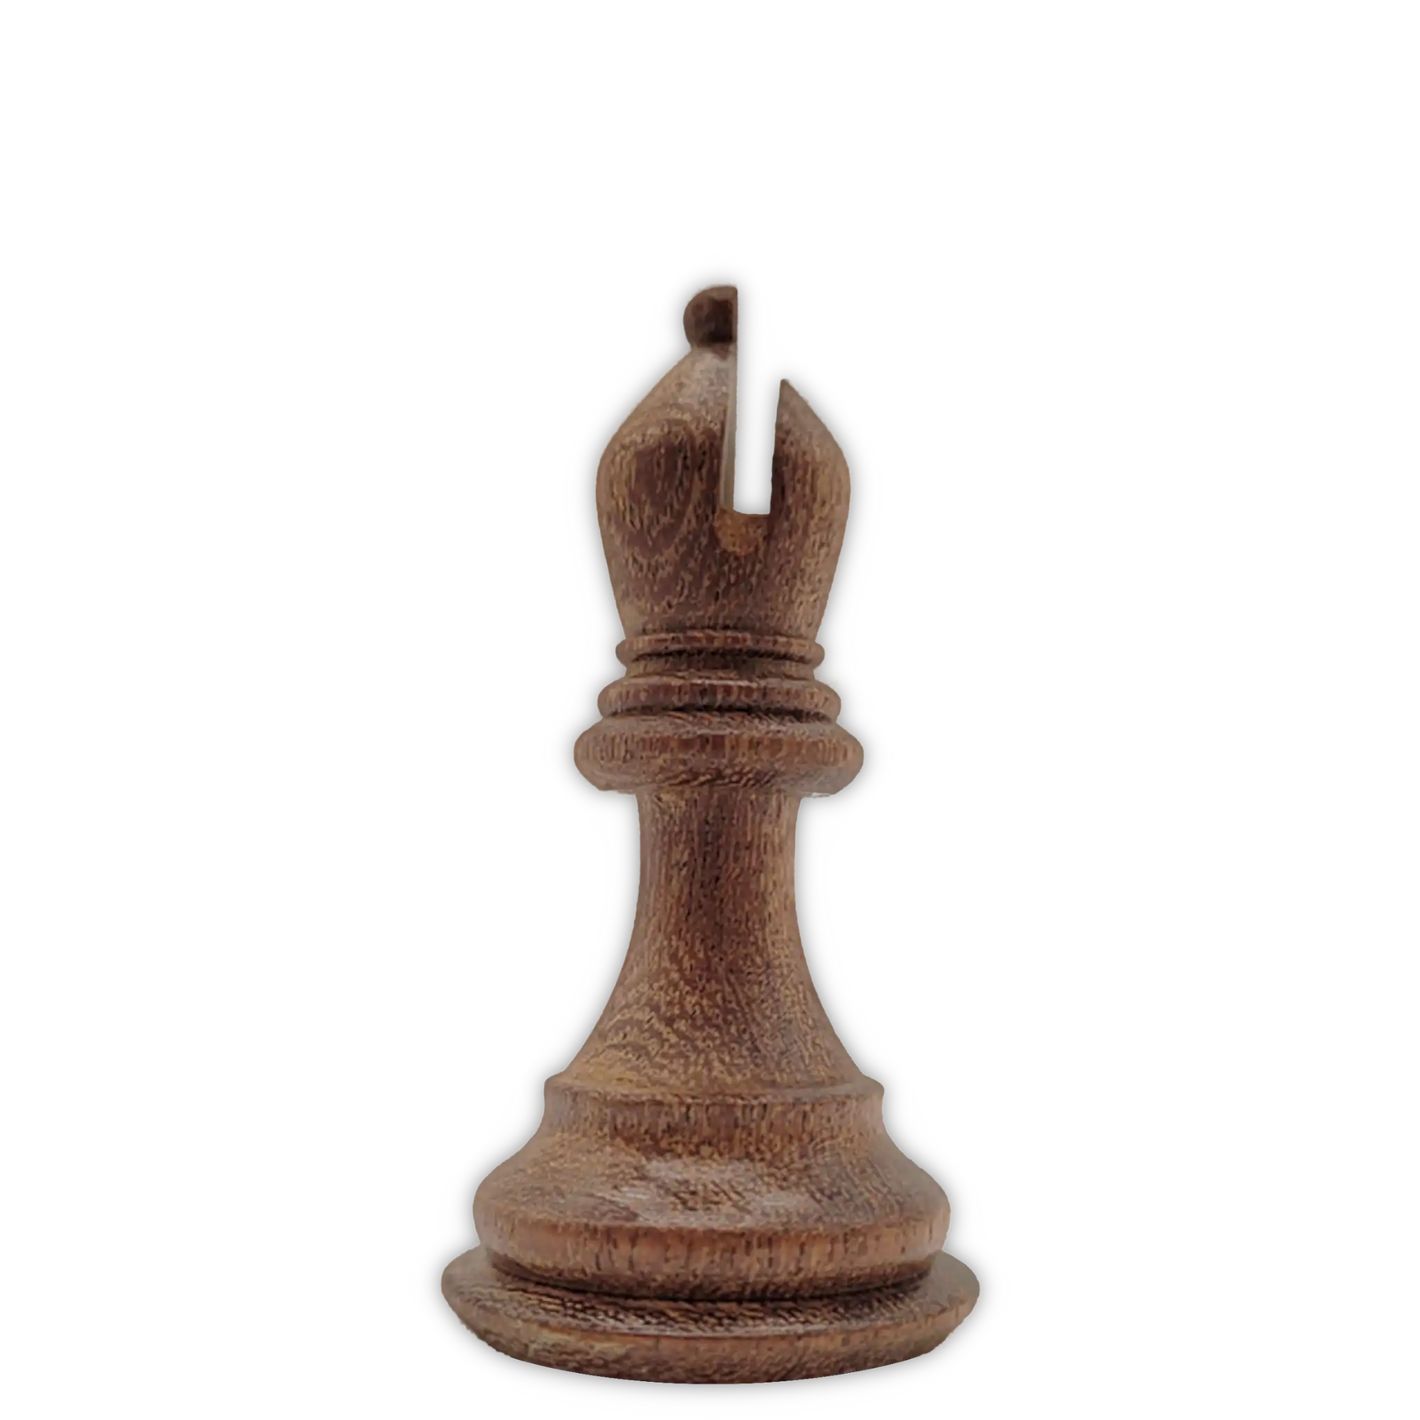 A bishop from a chess game